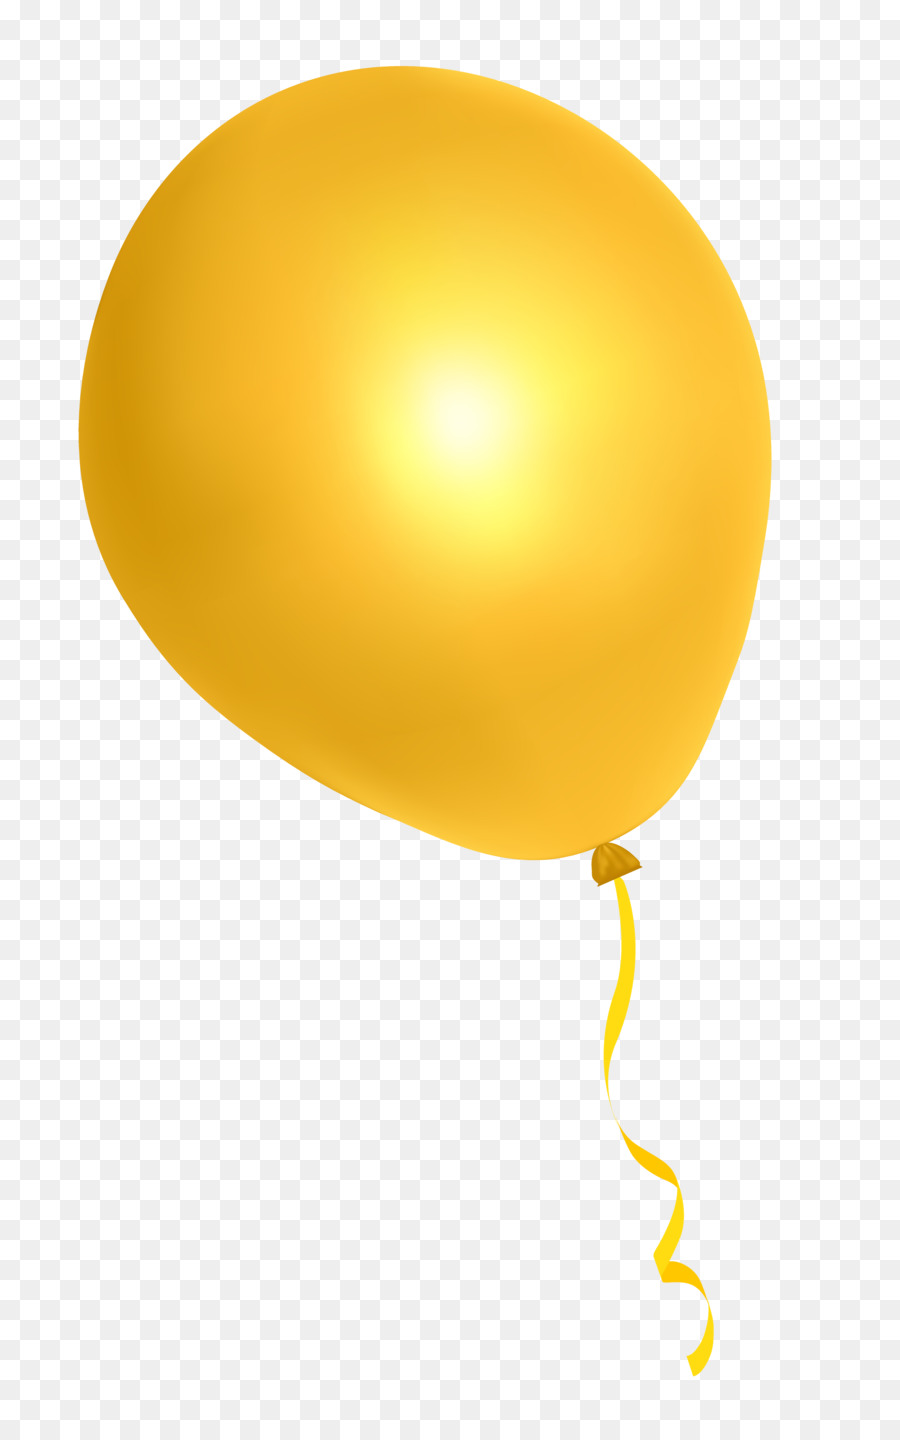 Yellow Balloon Font - Yellow Balloon png download - 2672*4248 - Free Transparent Yellow png Download.